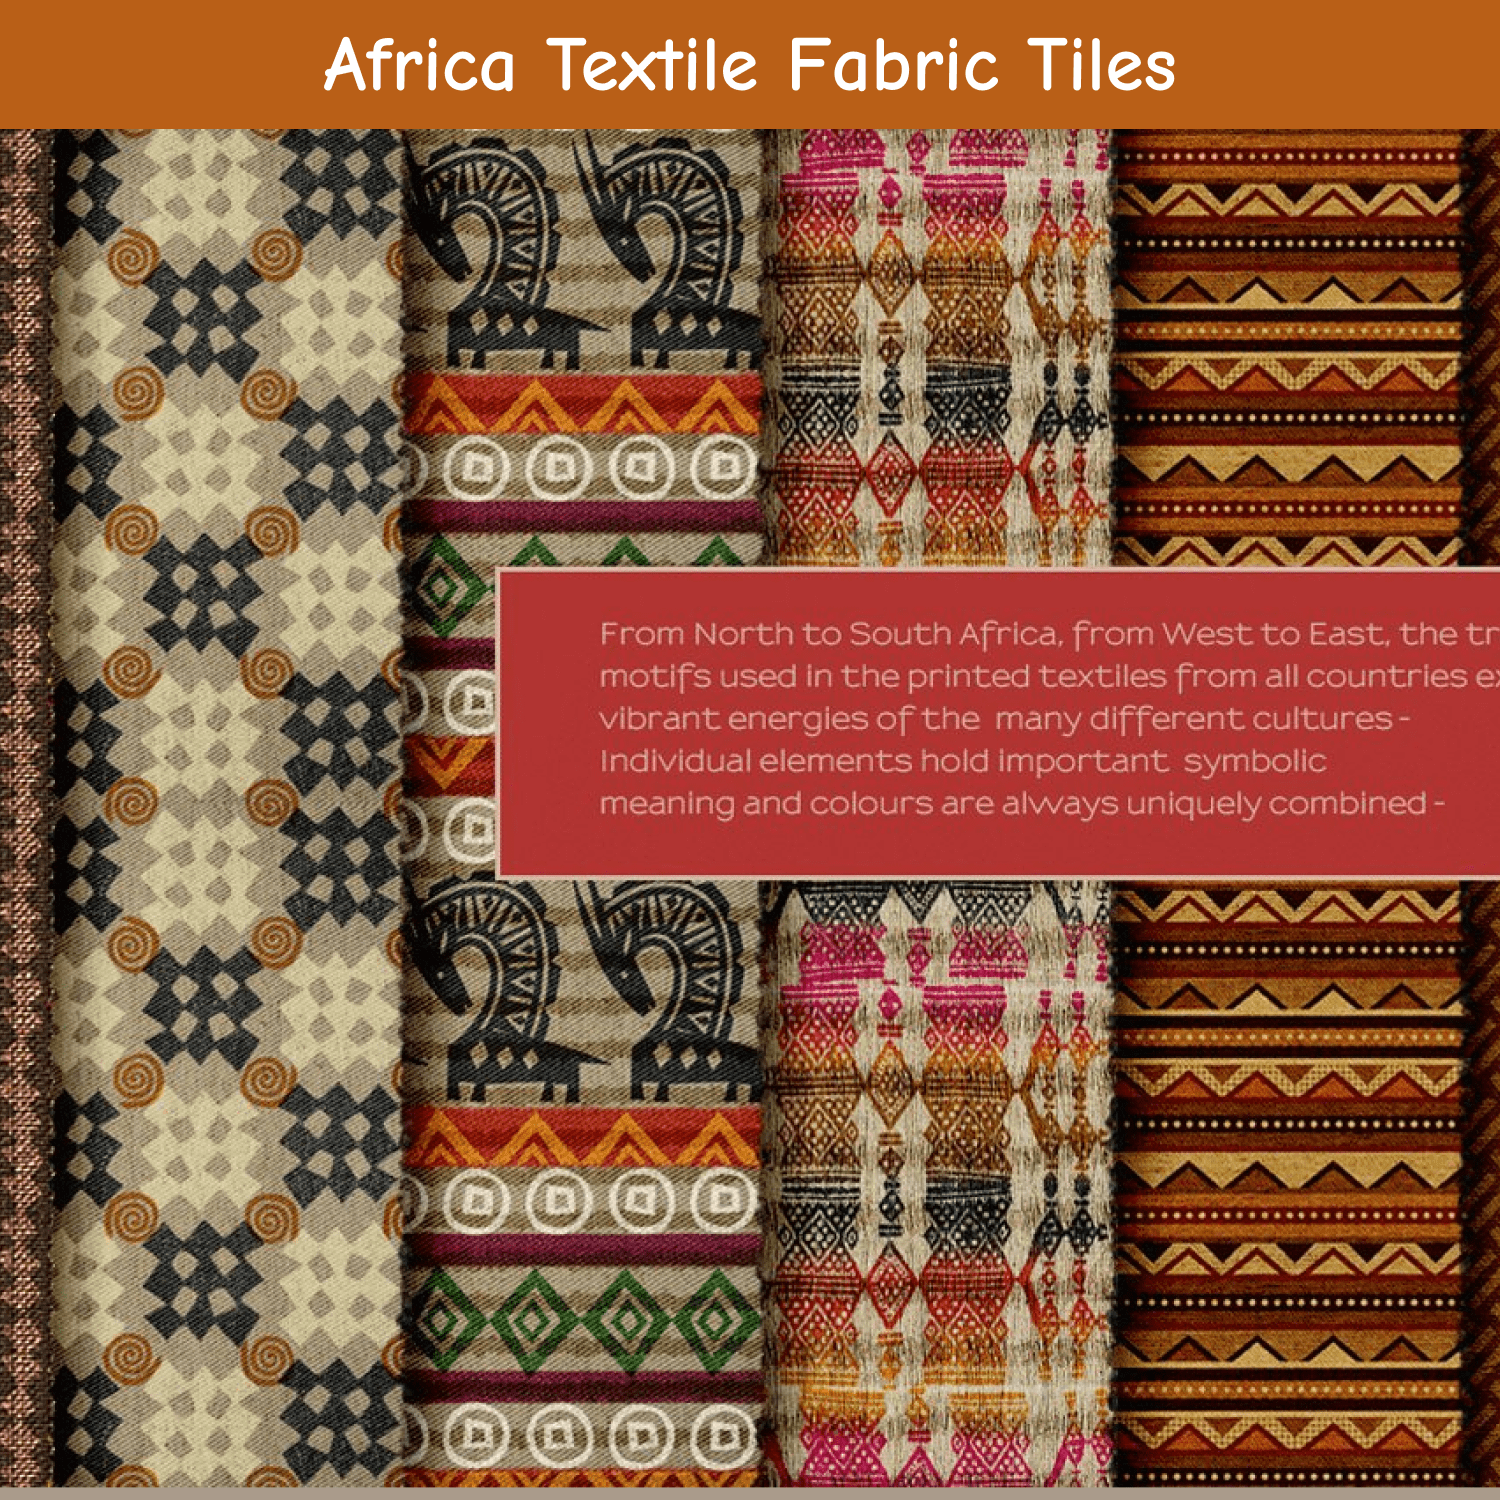 Africa Textile Fabric Tiles cover.